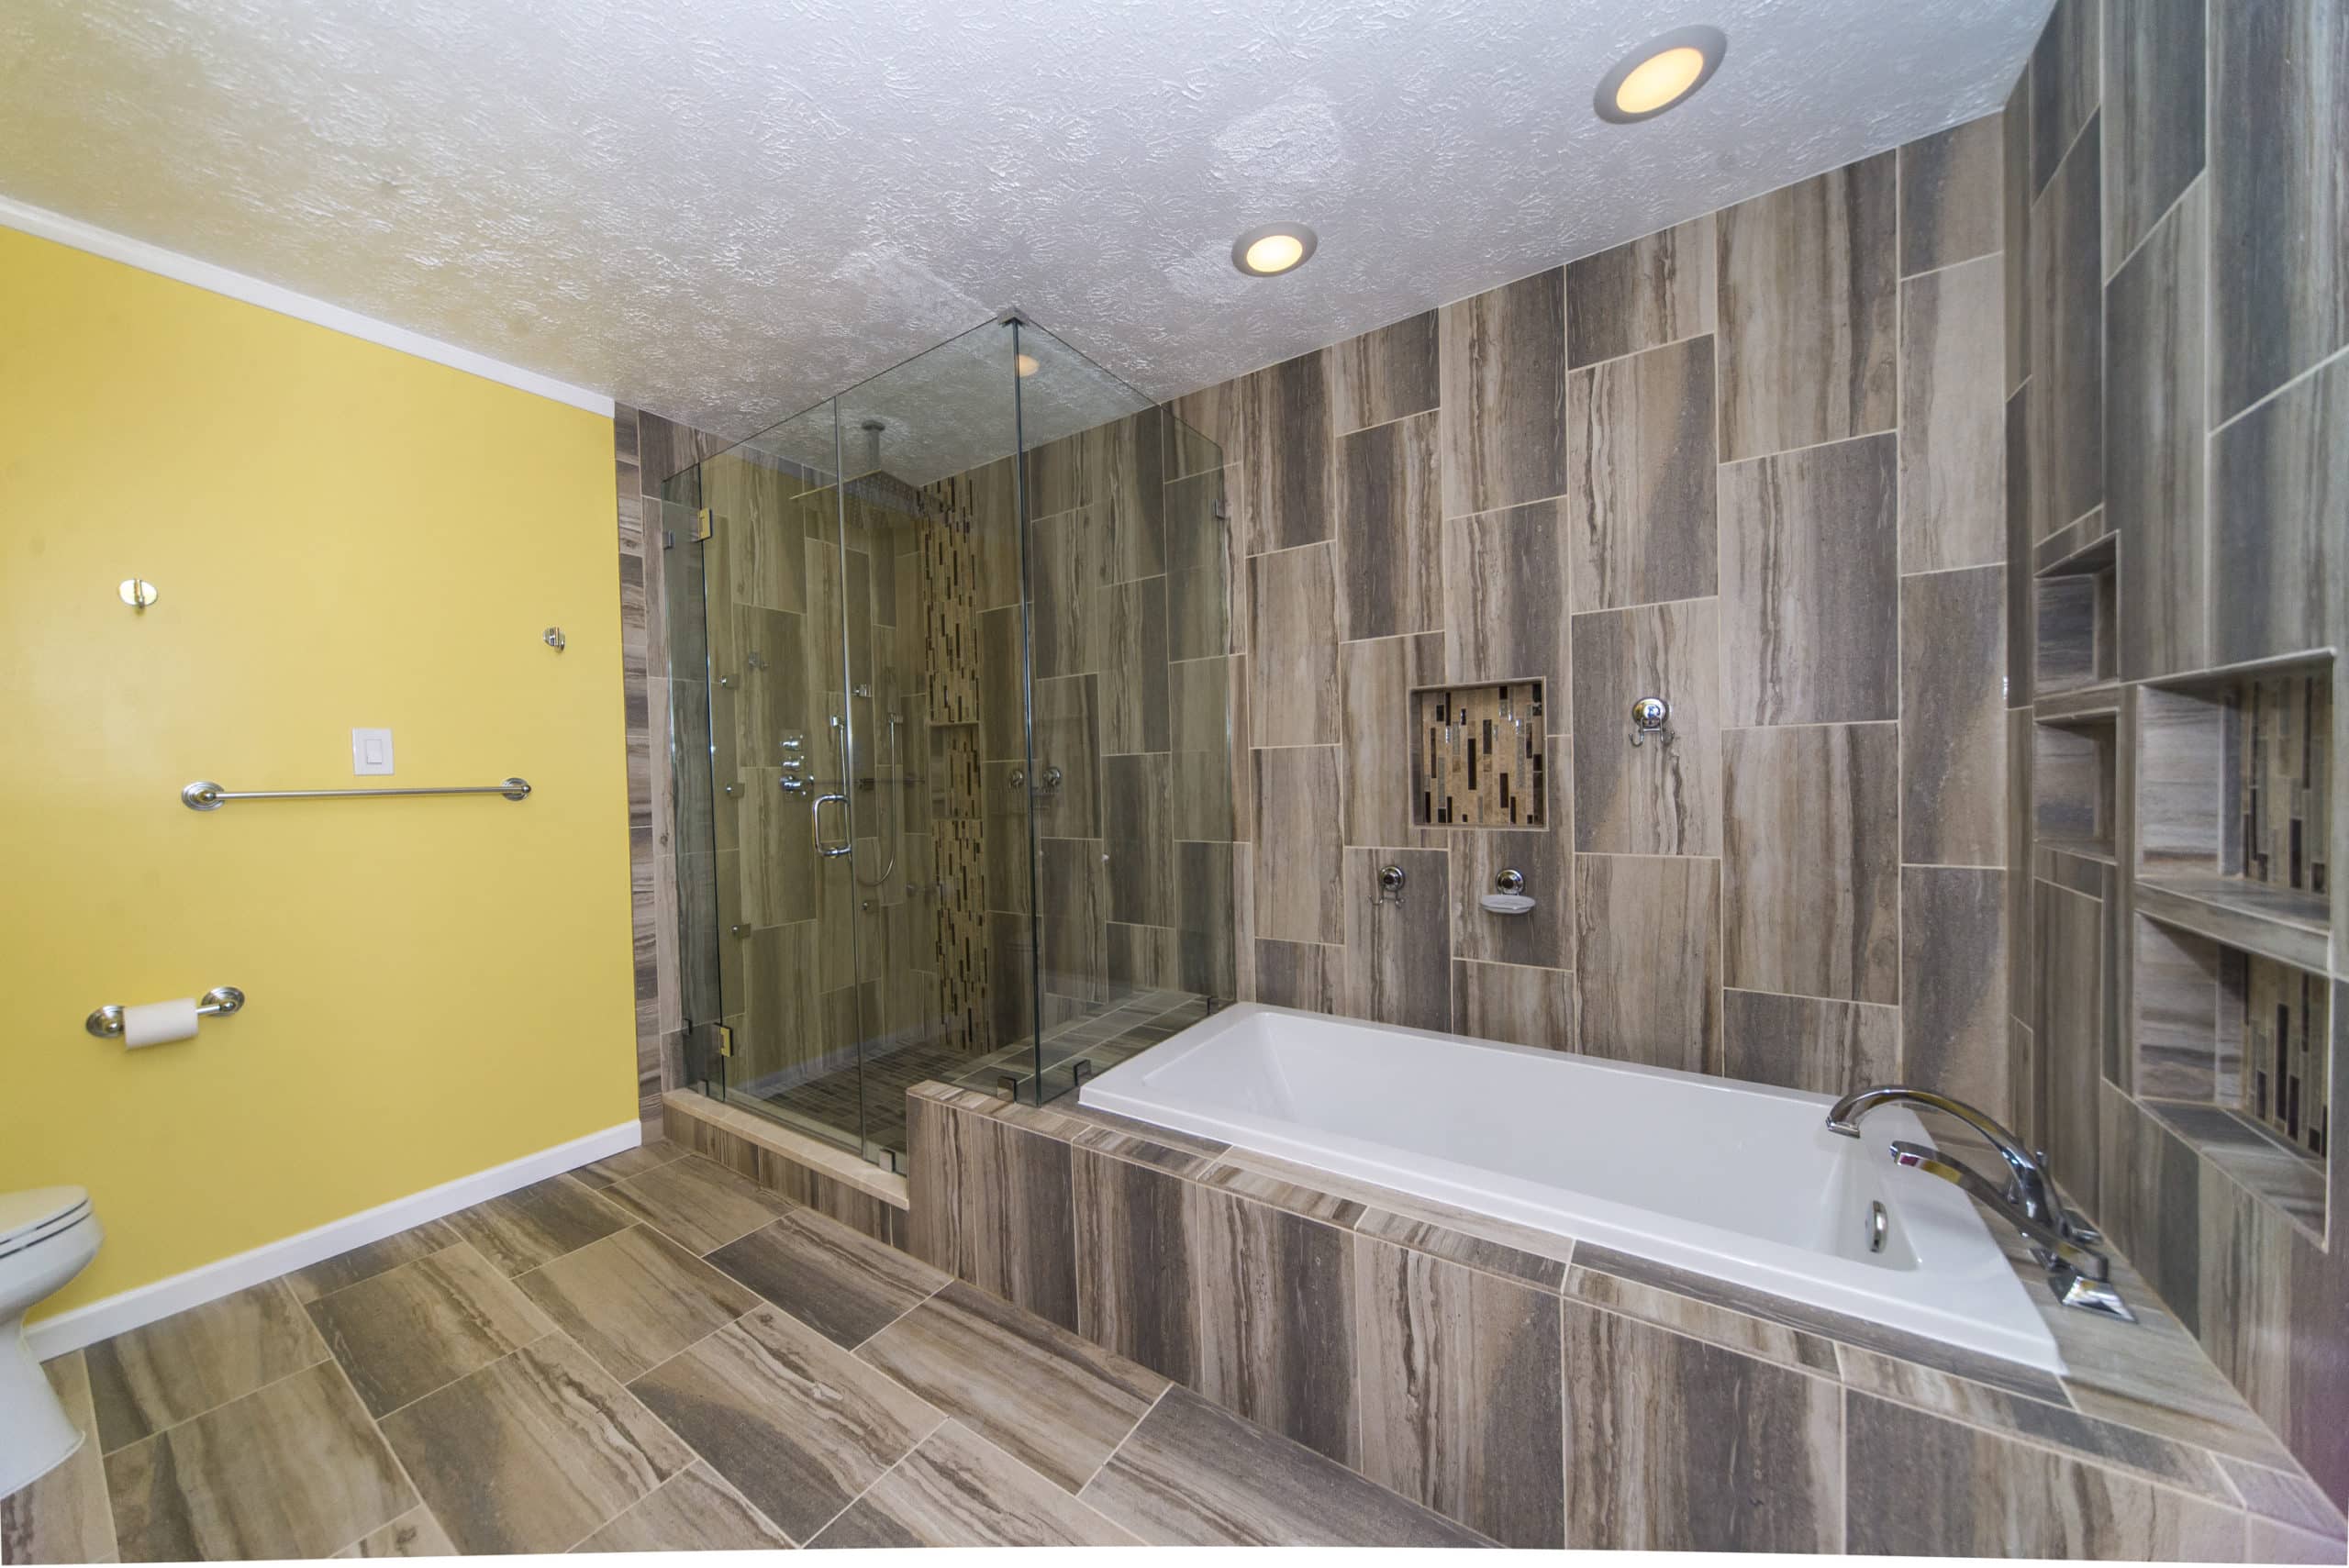 Spacious bathroom with wood colored flooring and wall, on a toilet, bath tub and shower